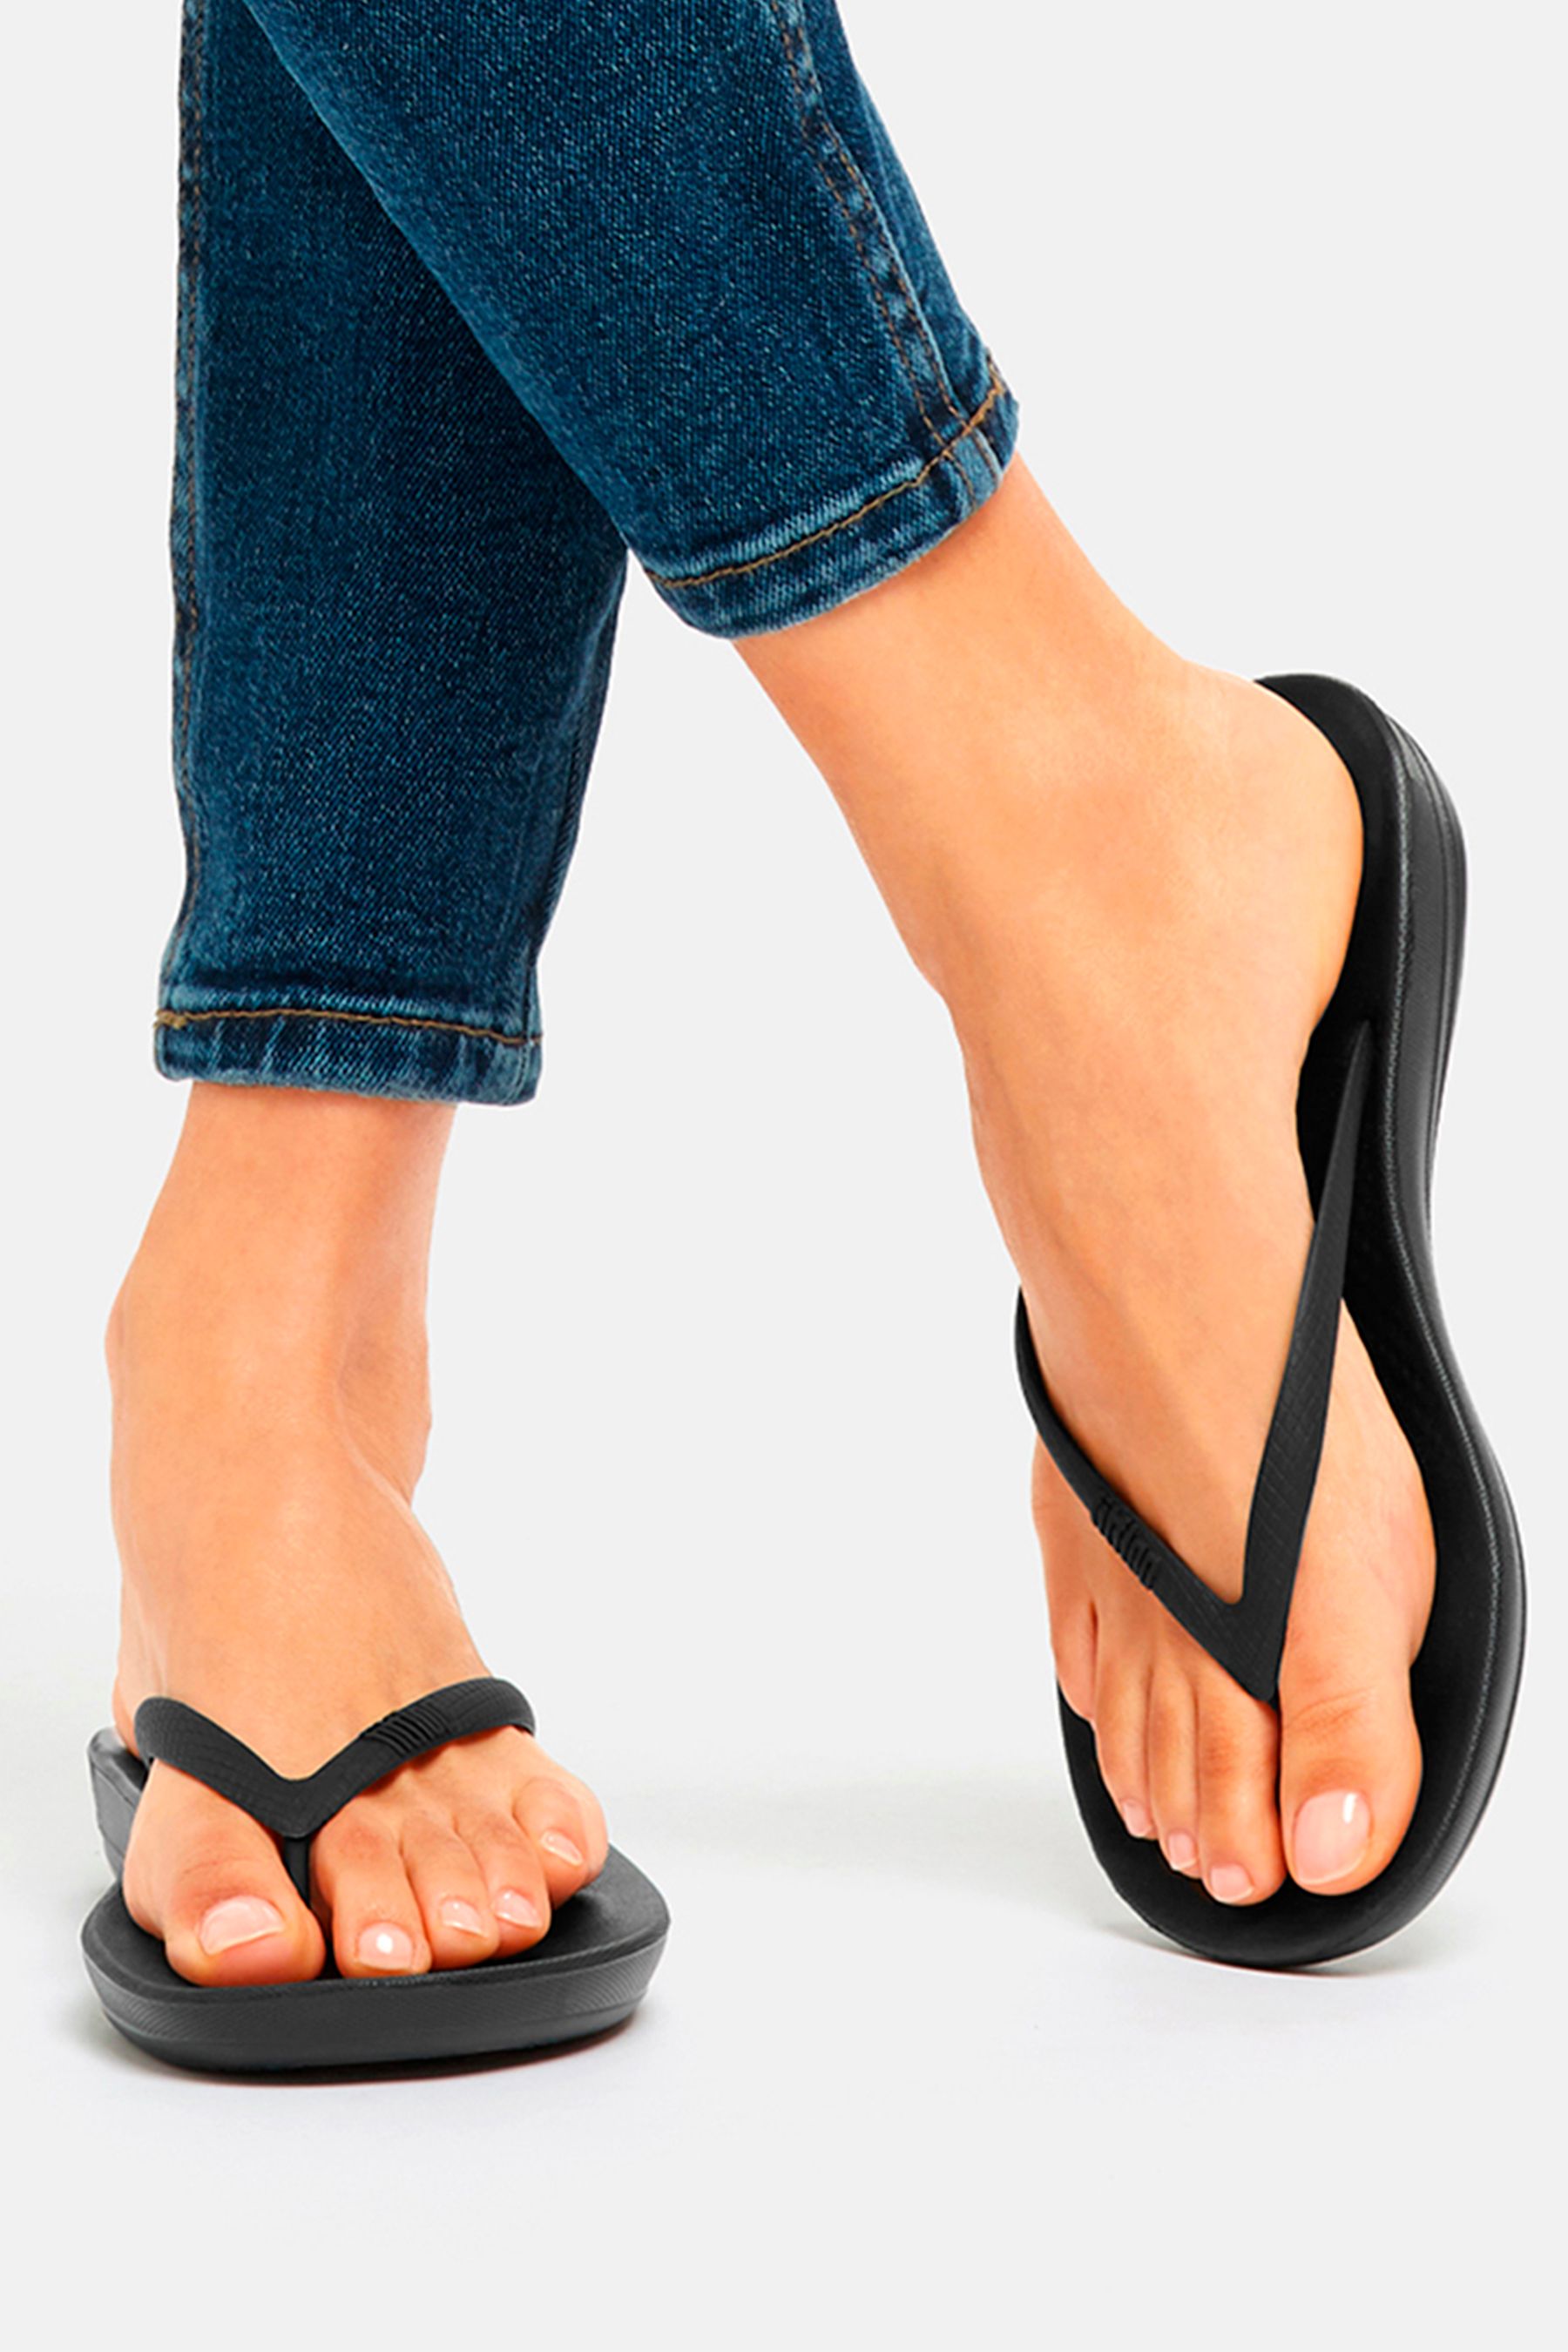 Buy FitFlop iQushion Ergonomic Flip Flops from the Next UK online shop